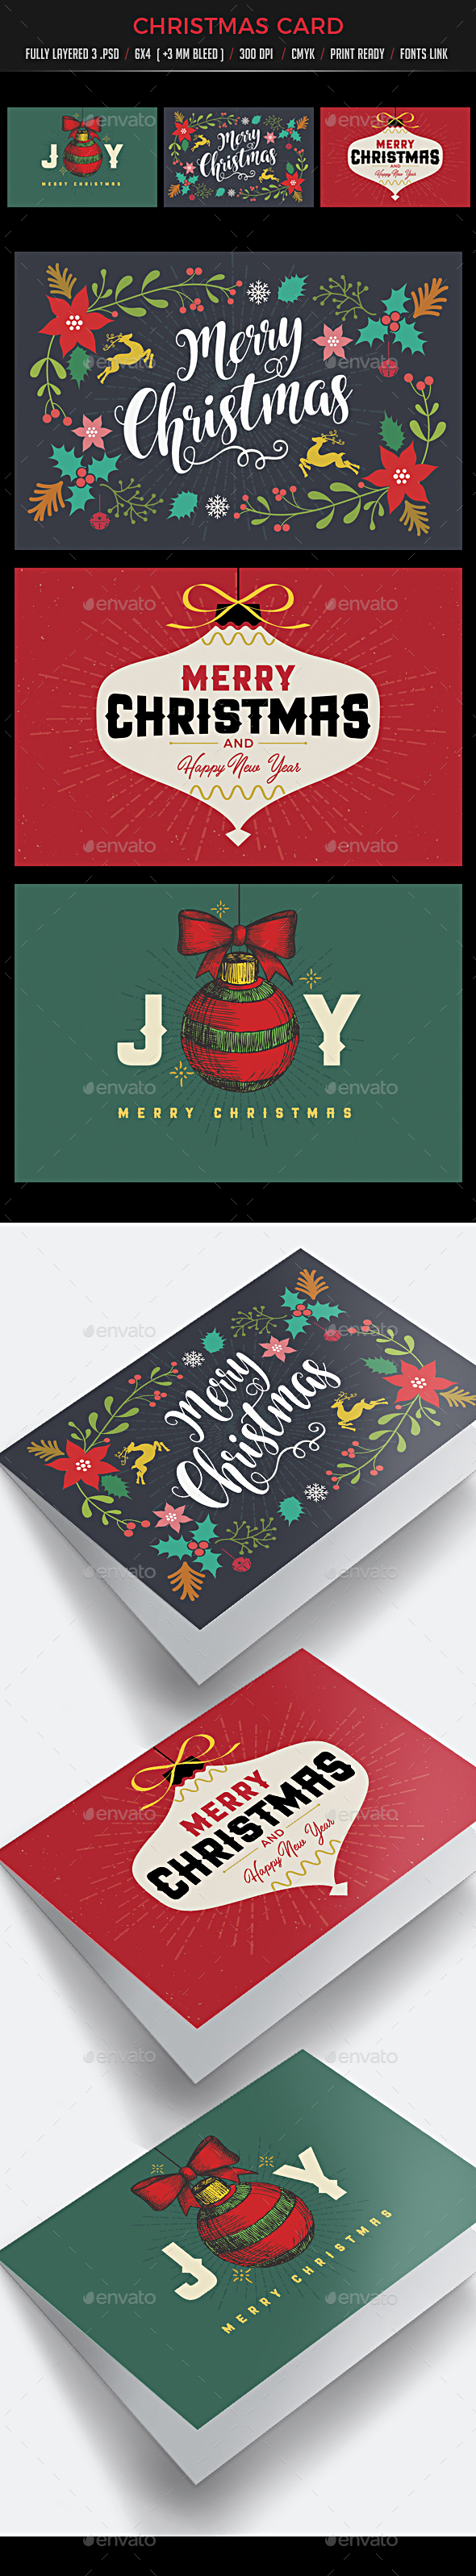 Christmas Cards by creativeartx | GraphicRiver